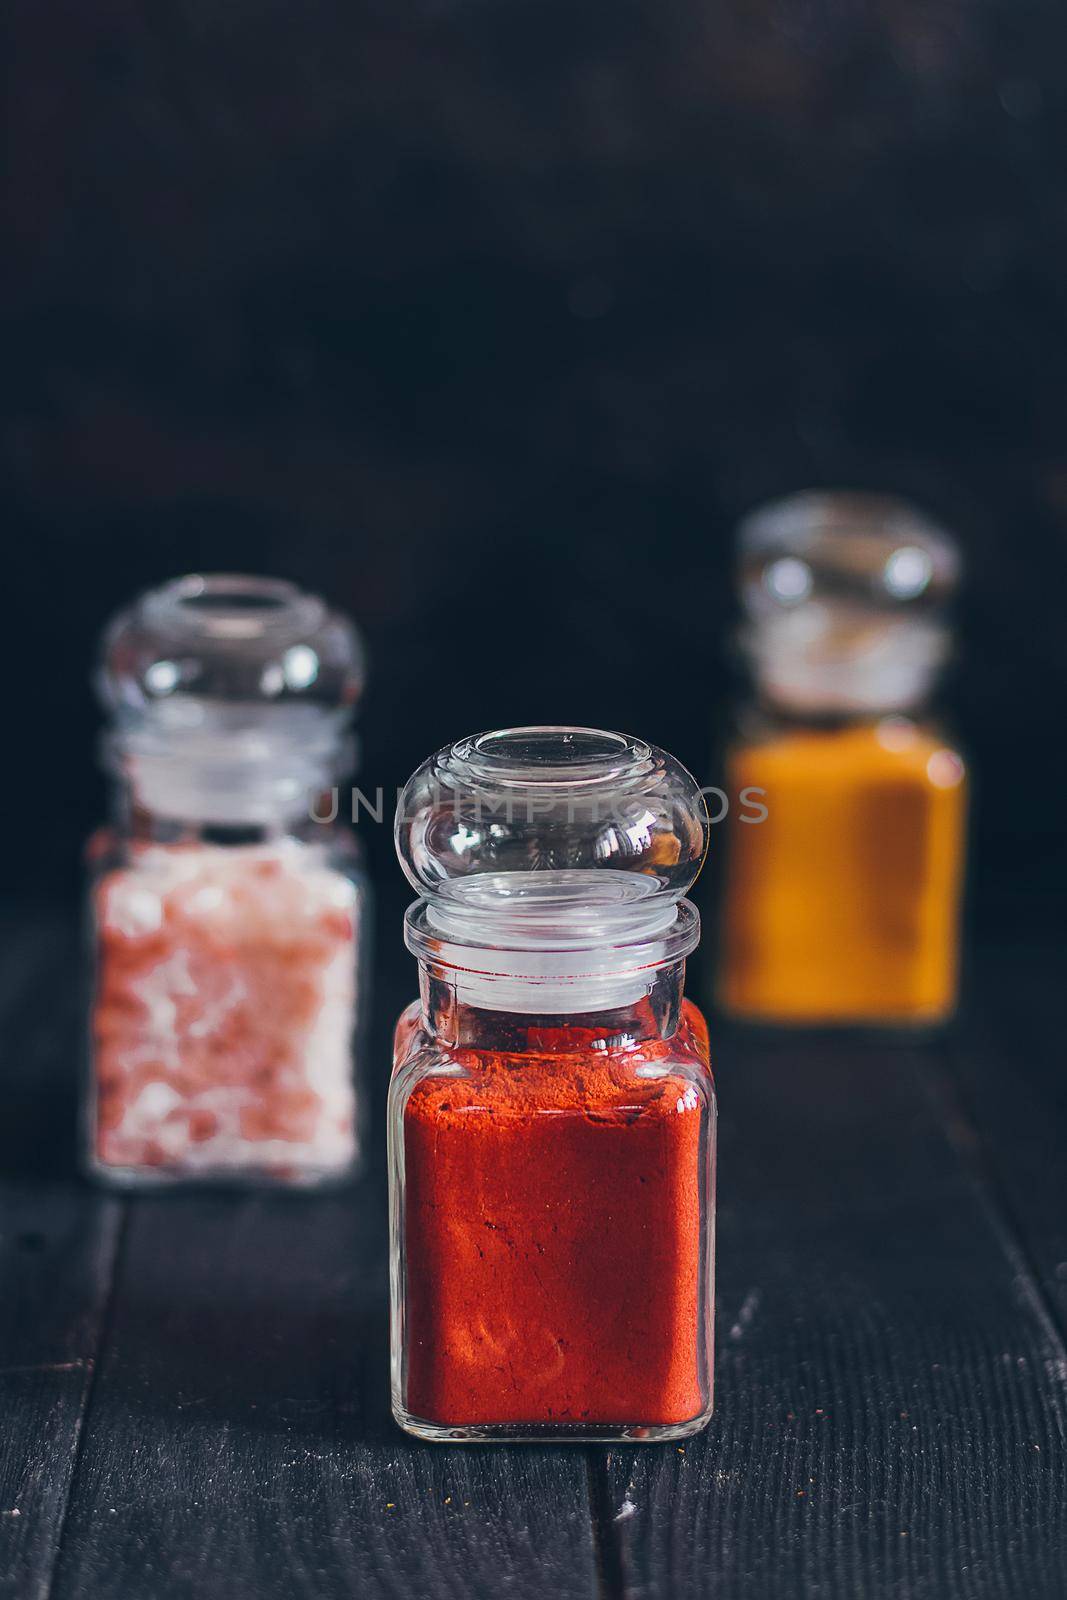 Bright aromatic spices in glass jars, assortments of spices: pink salt, paprika and turmeric on black stone background. by mmp1206